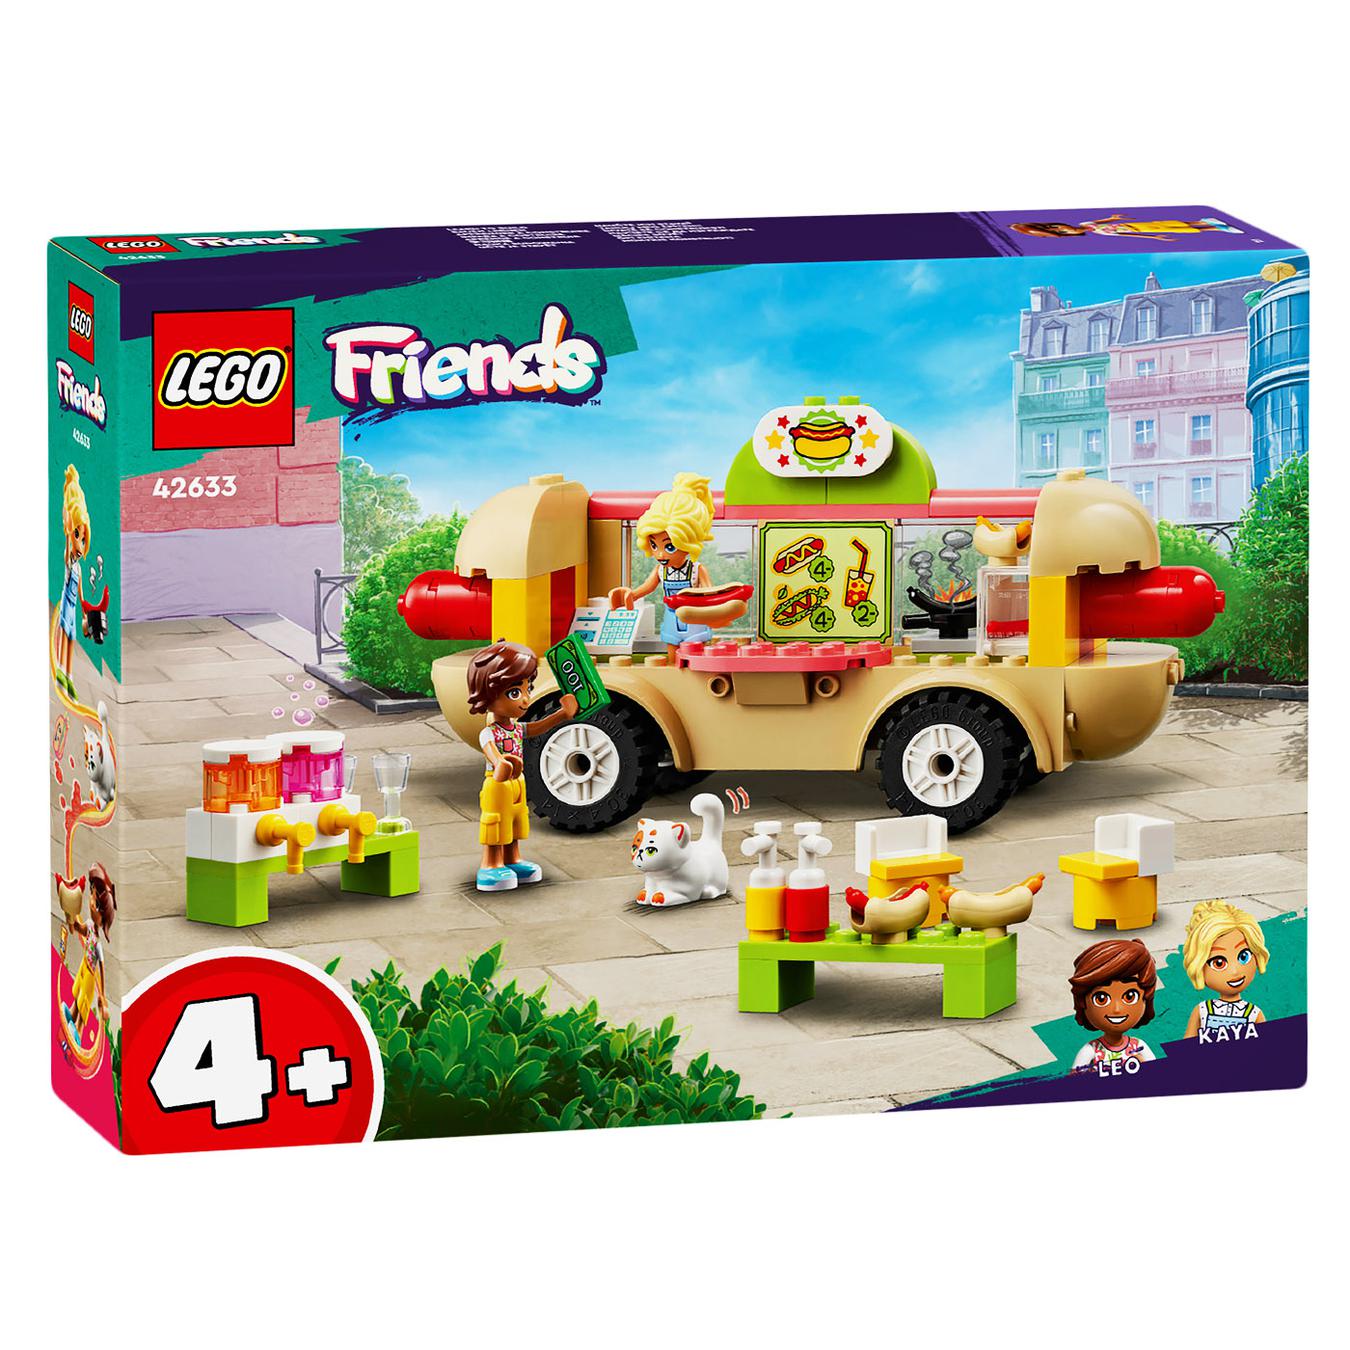 Constructor LEGO Friends 42633 Truck with hot dogs